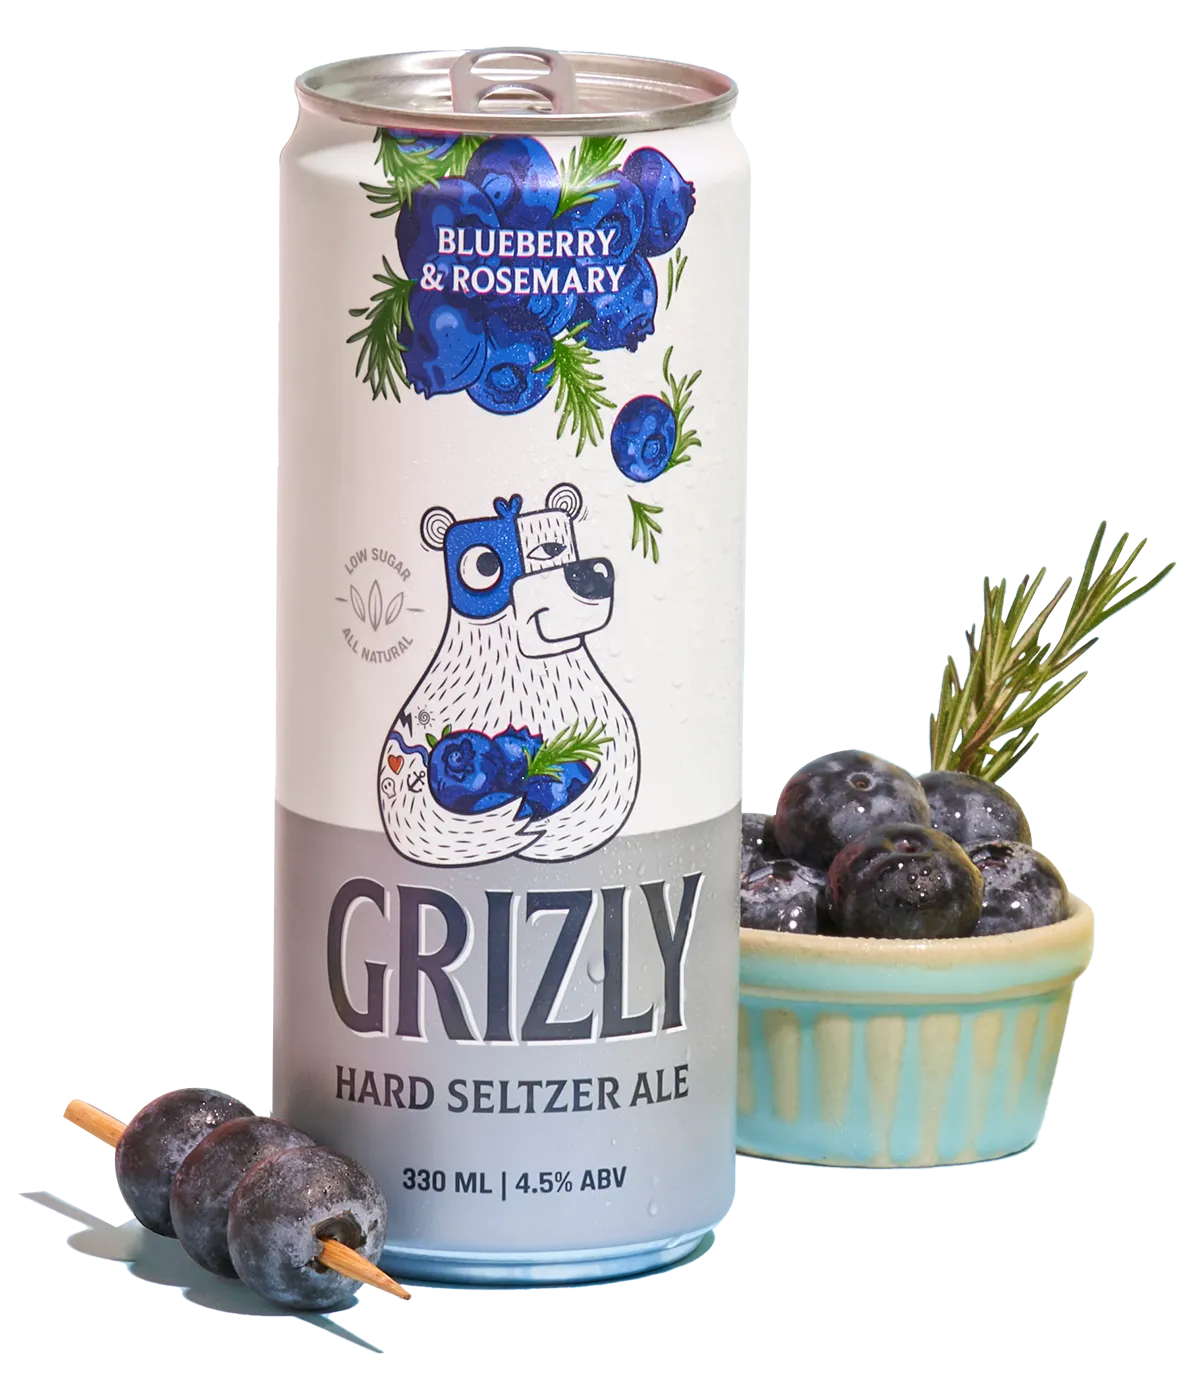 Grizly Blueberry & Rosemary